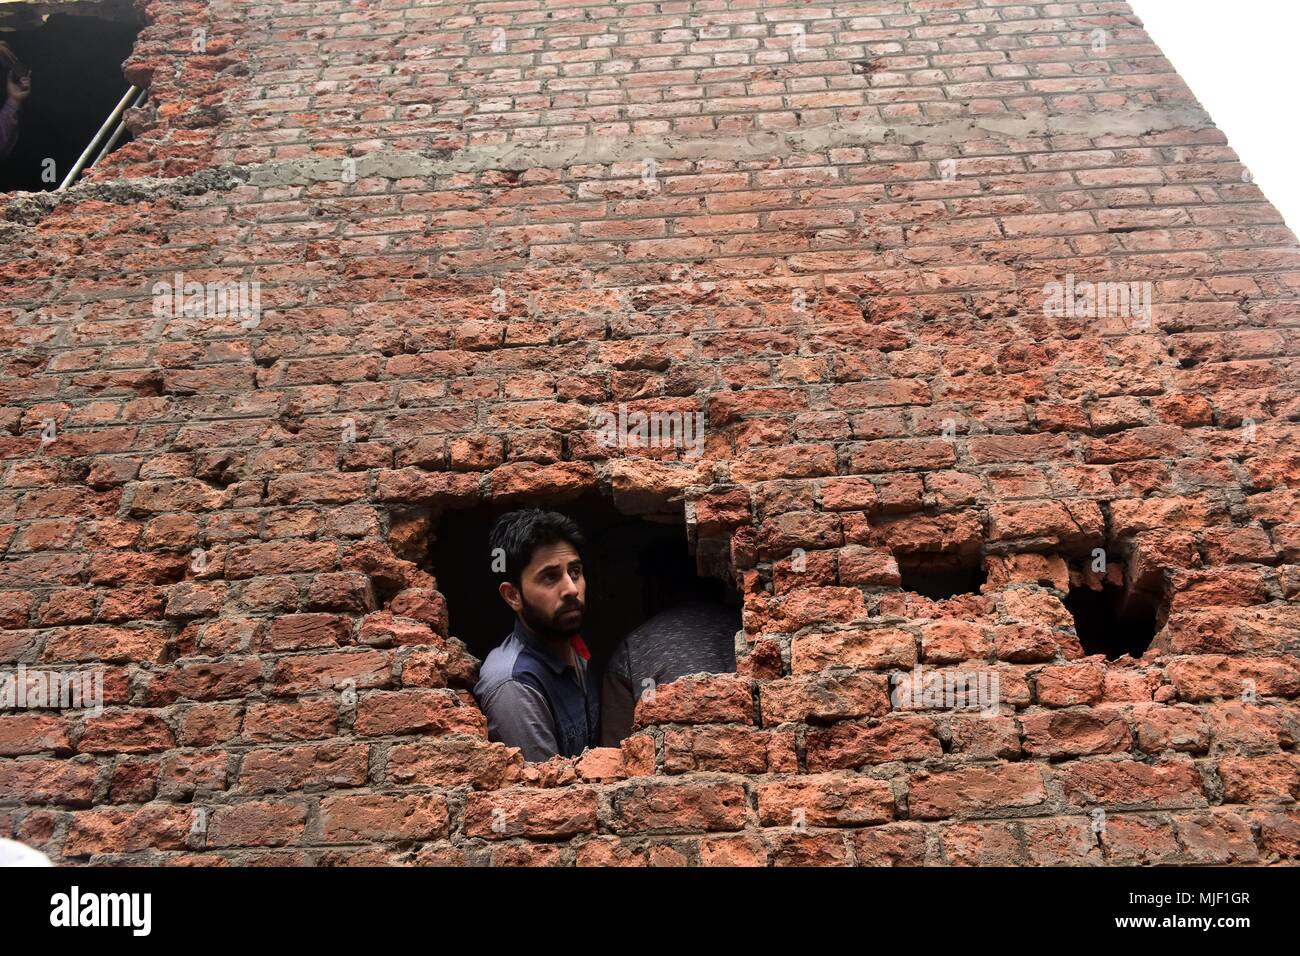 Kashmir, India, 5 May 2018.  A Kashmiri resident looks out of the damaged hous militants were trapped during an encounter in Srinagar, Indian administered Kashmir. Three suspected militants and one civilian have been killed while three Indian paramilitary men sustained injuries in a gun battle in Srinagar, the summer capital of Indian administered Kashmir. The encounter started after government forces cordoned off a Chattabal area following the presence of militants in the area, officials said.  the militants were believed Credit: ZUMA Press, Inc./Alamy Live News Stock Photo